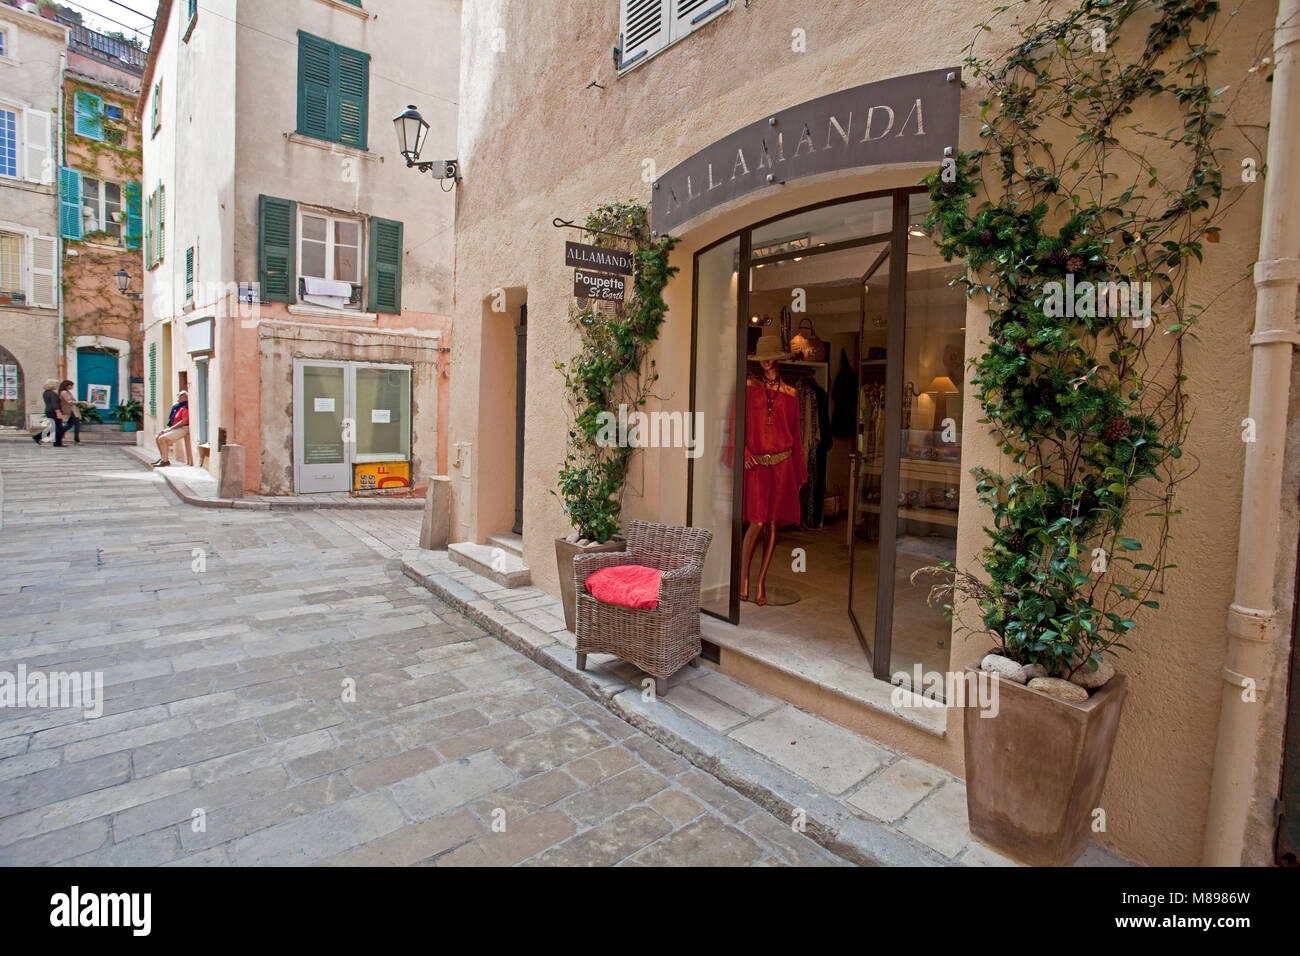 Fashion shop Allamanda at a alley, old town of Saint-Tropez, french riviera, South France, Cote d'Azur, France, Europe Stock Photo